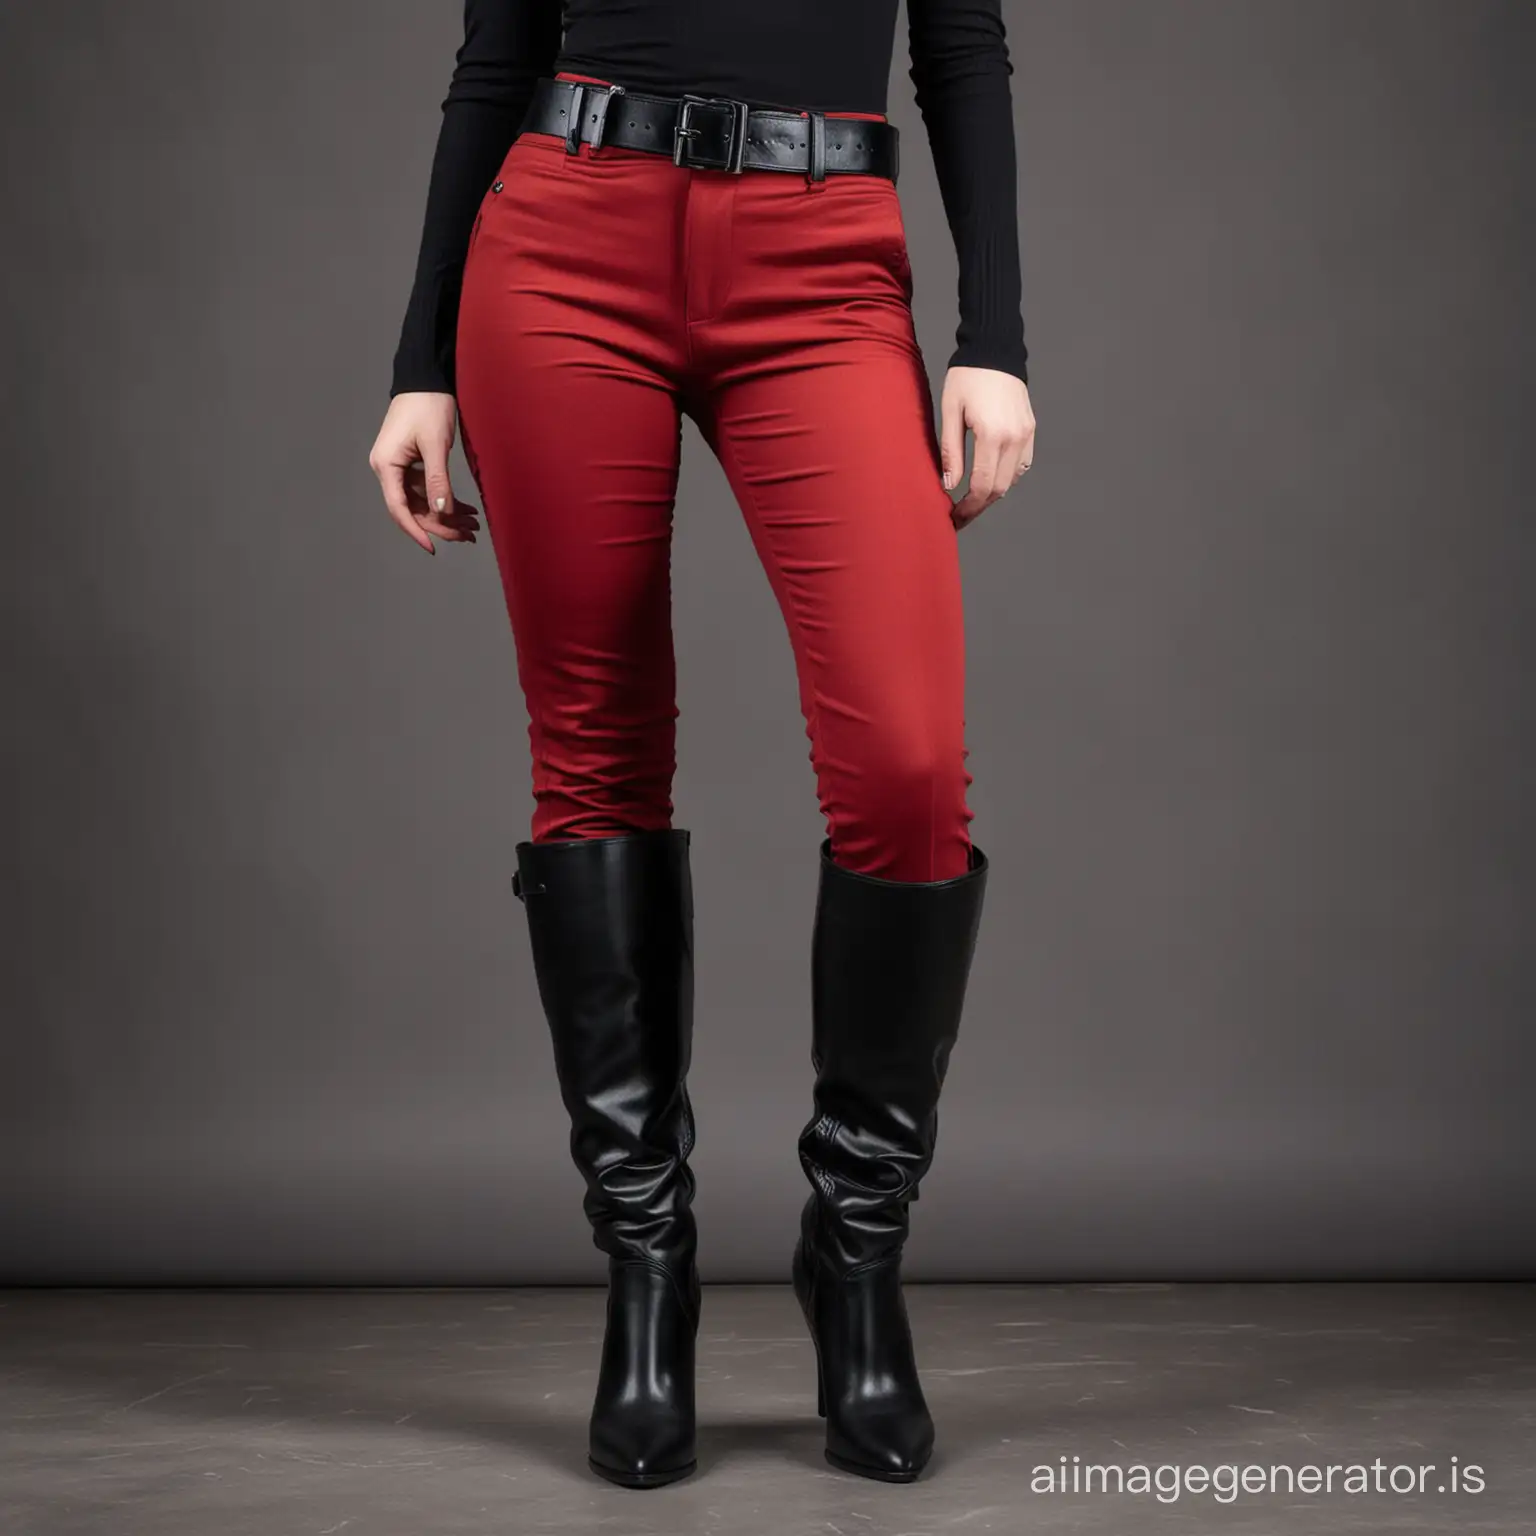 closeup on a lady in red textile pants with belt, tight black knee high boots, standing tall